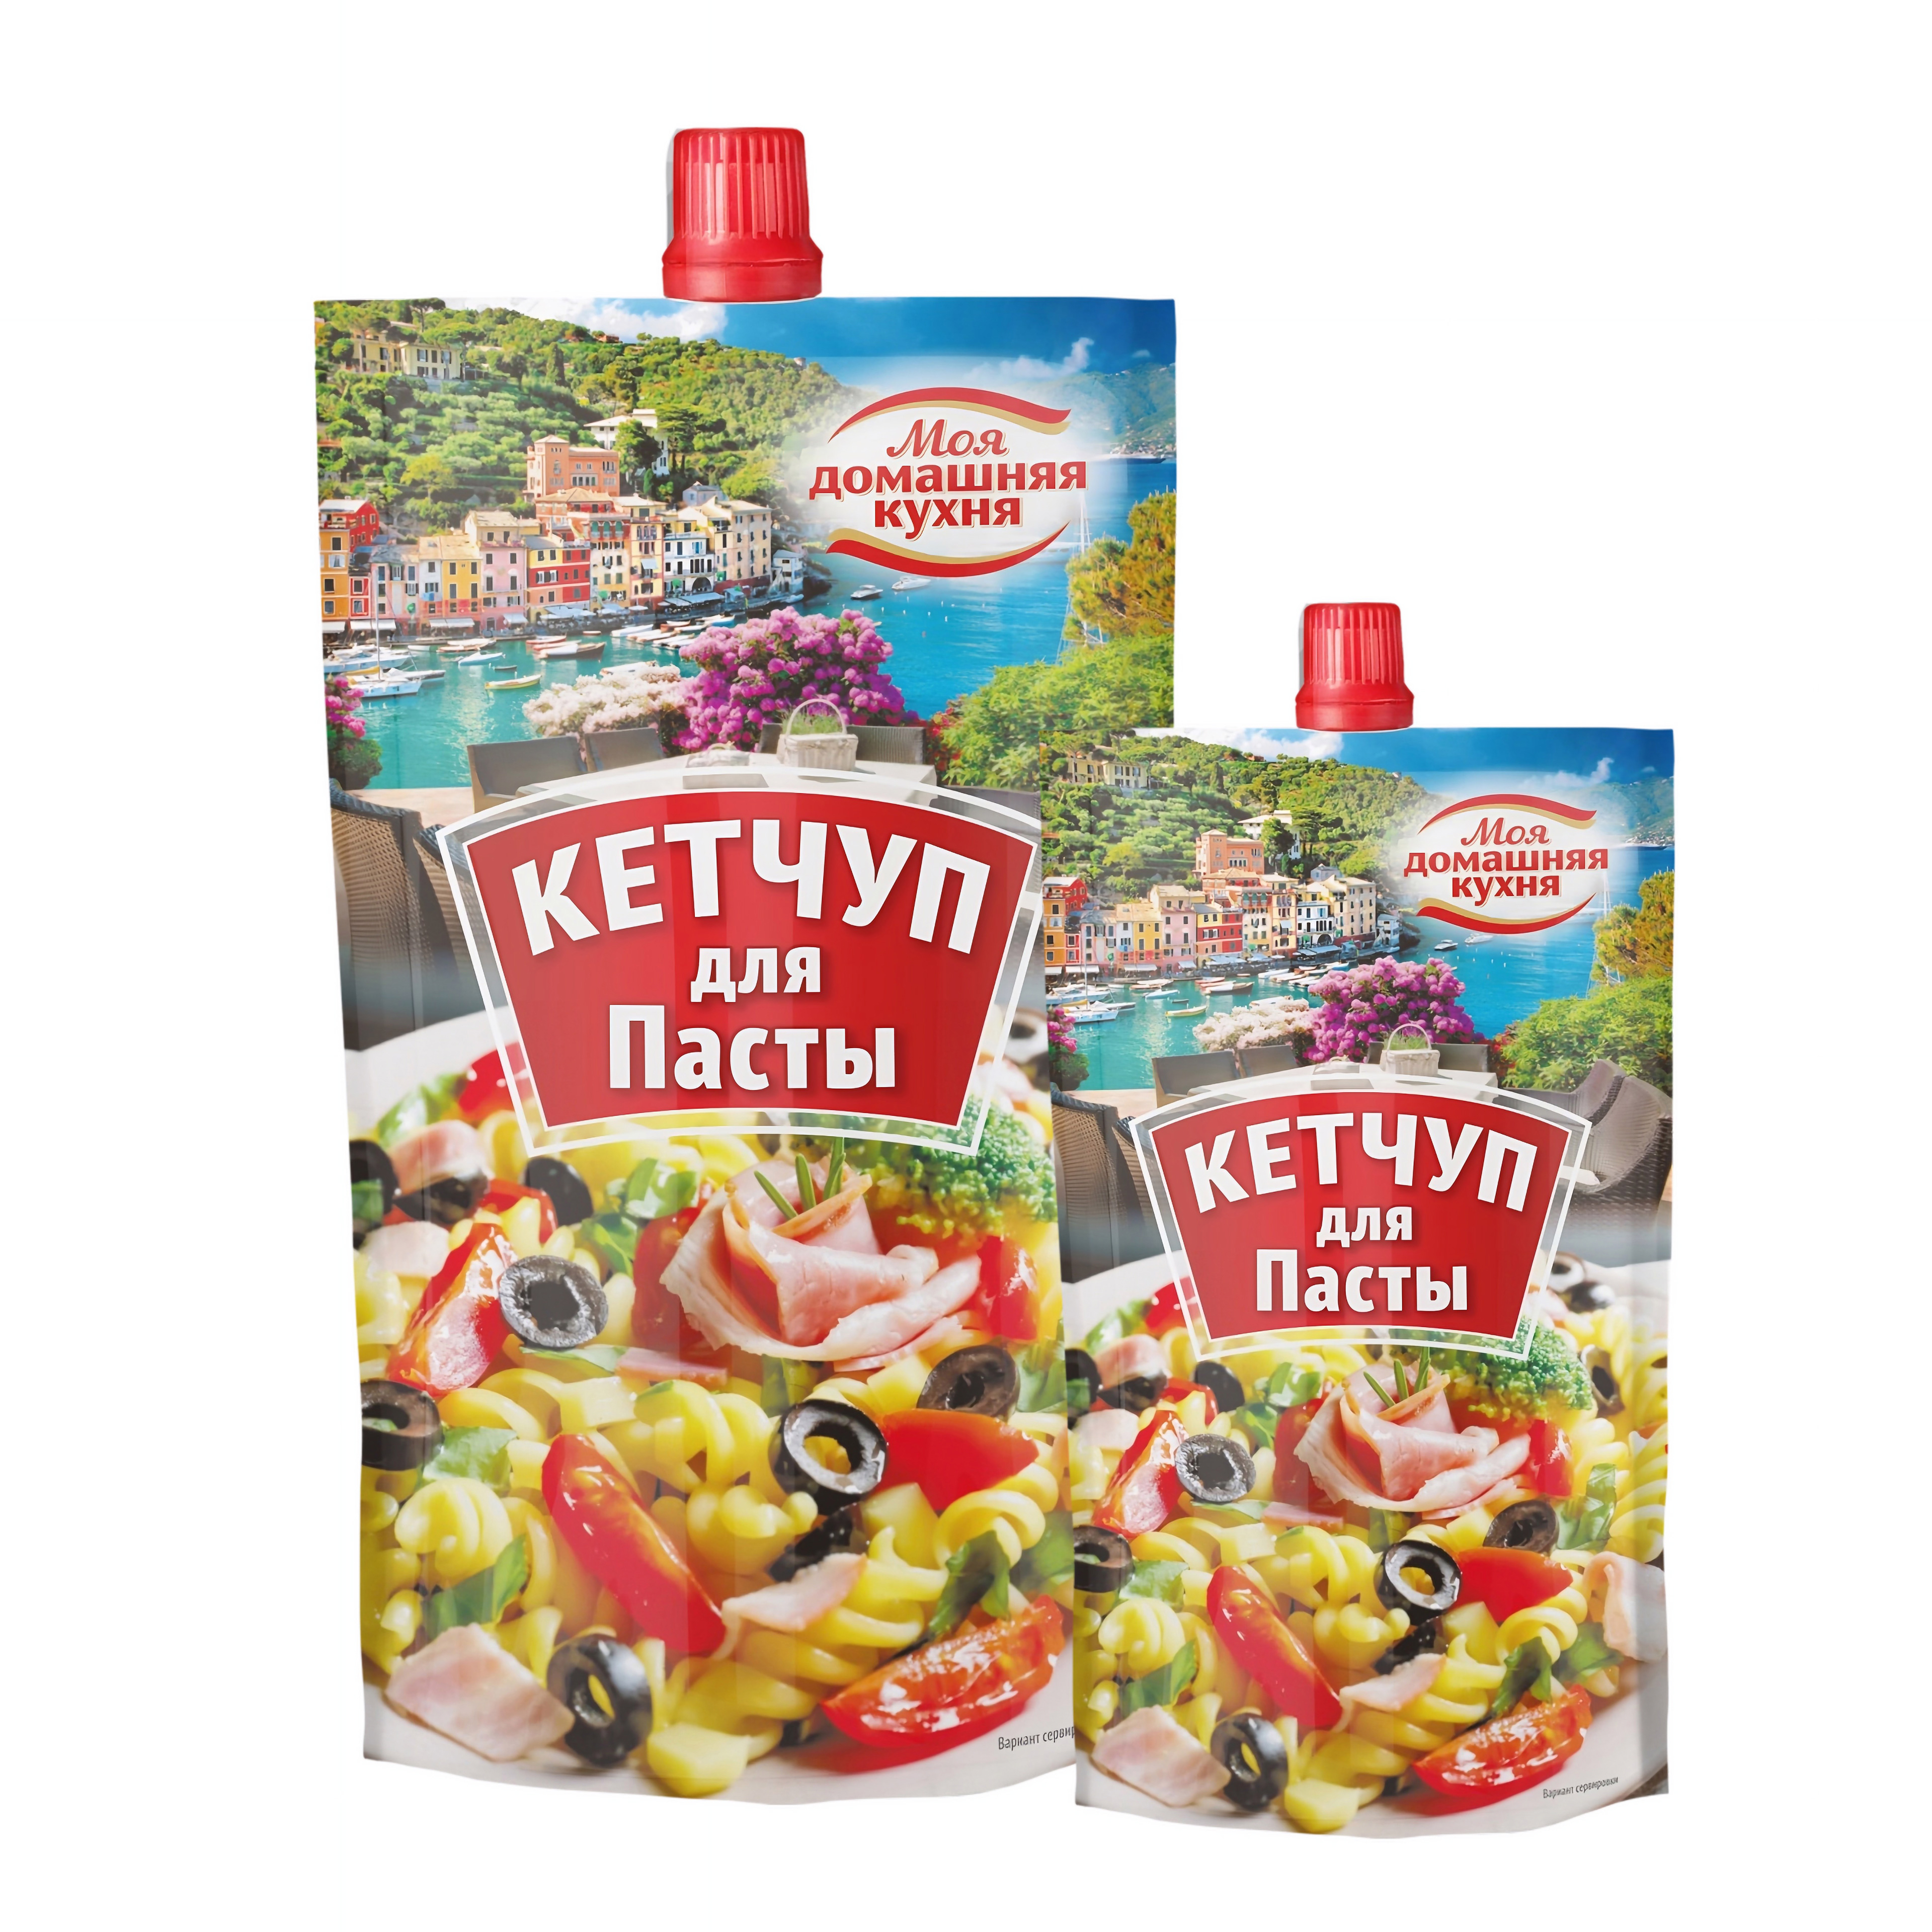 Ketchup for pasta in bulk from the manufacturer